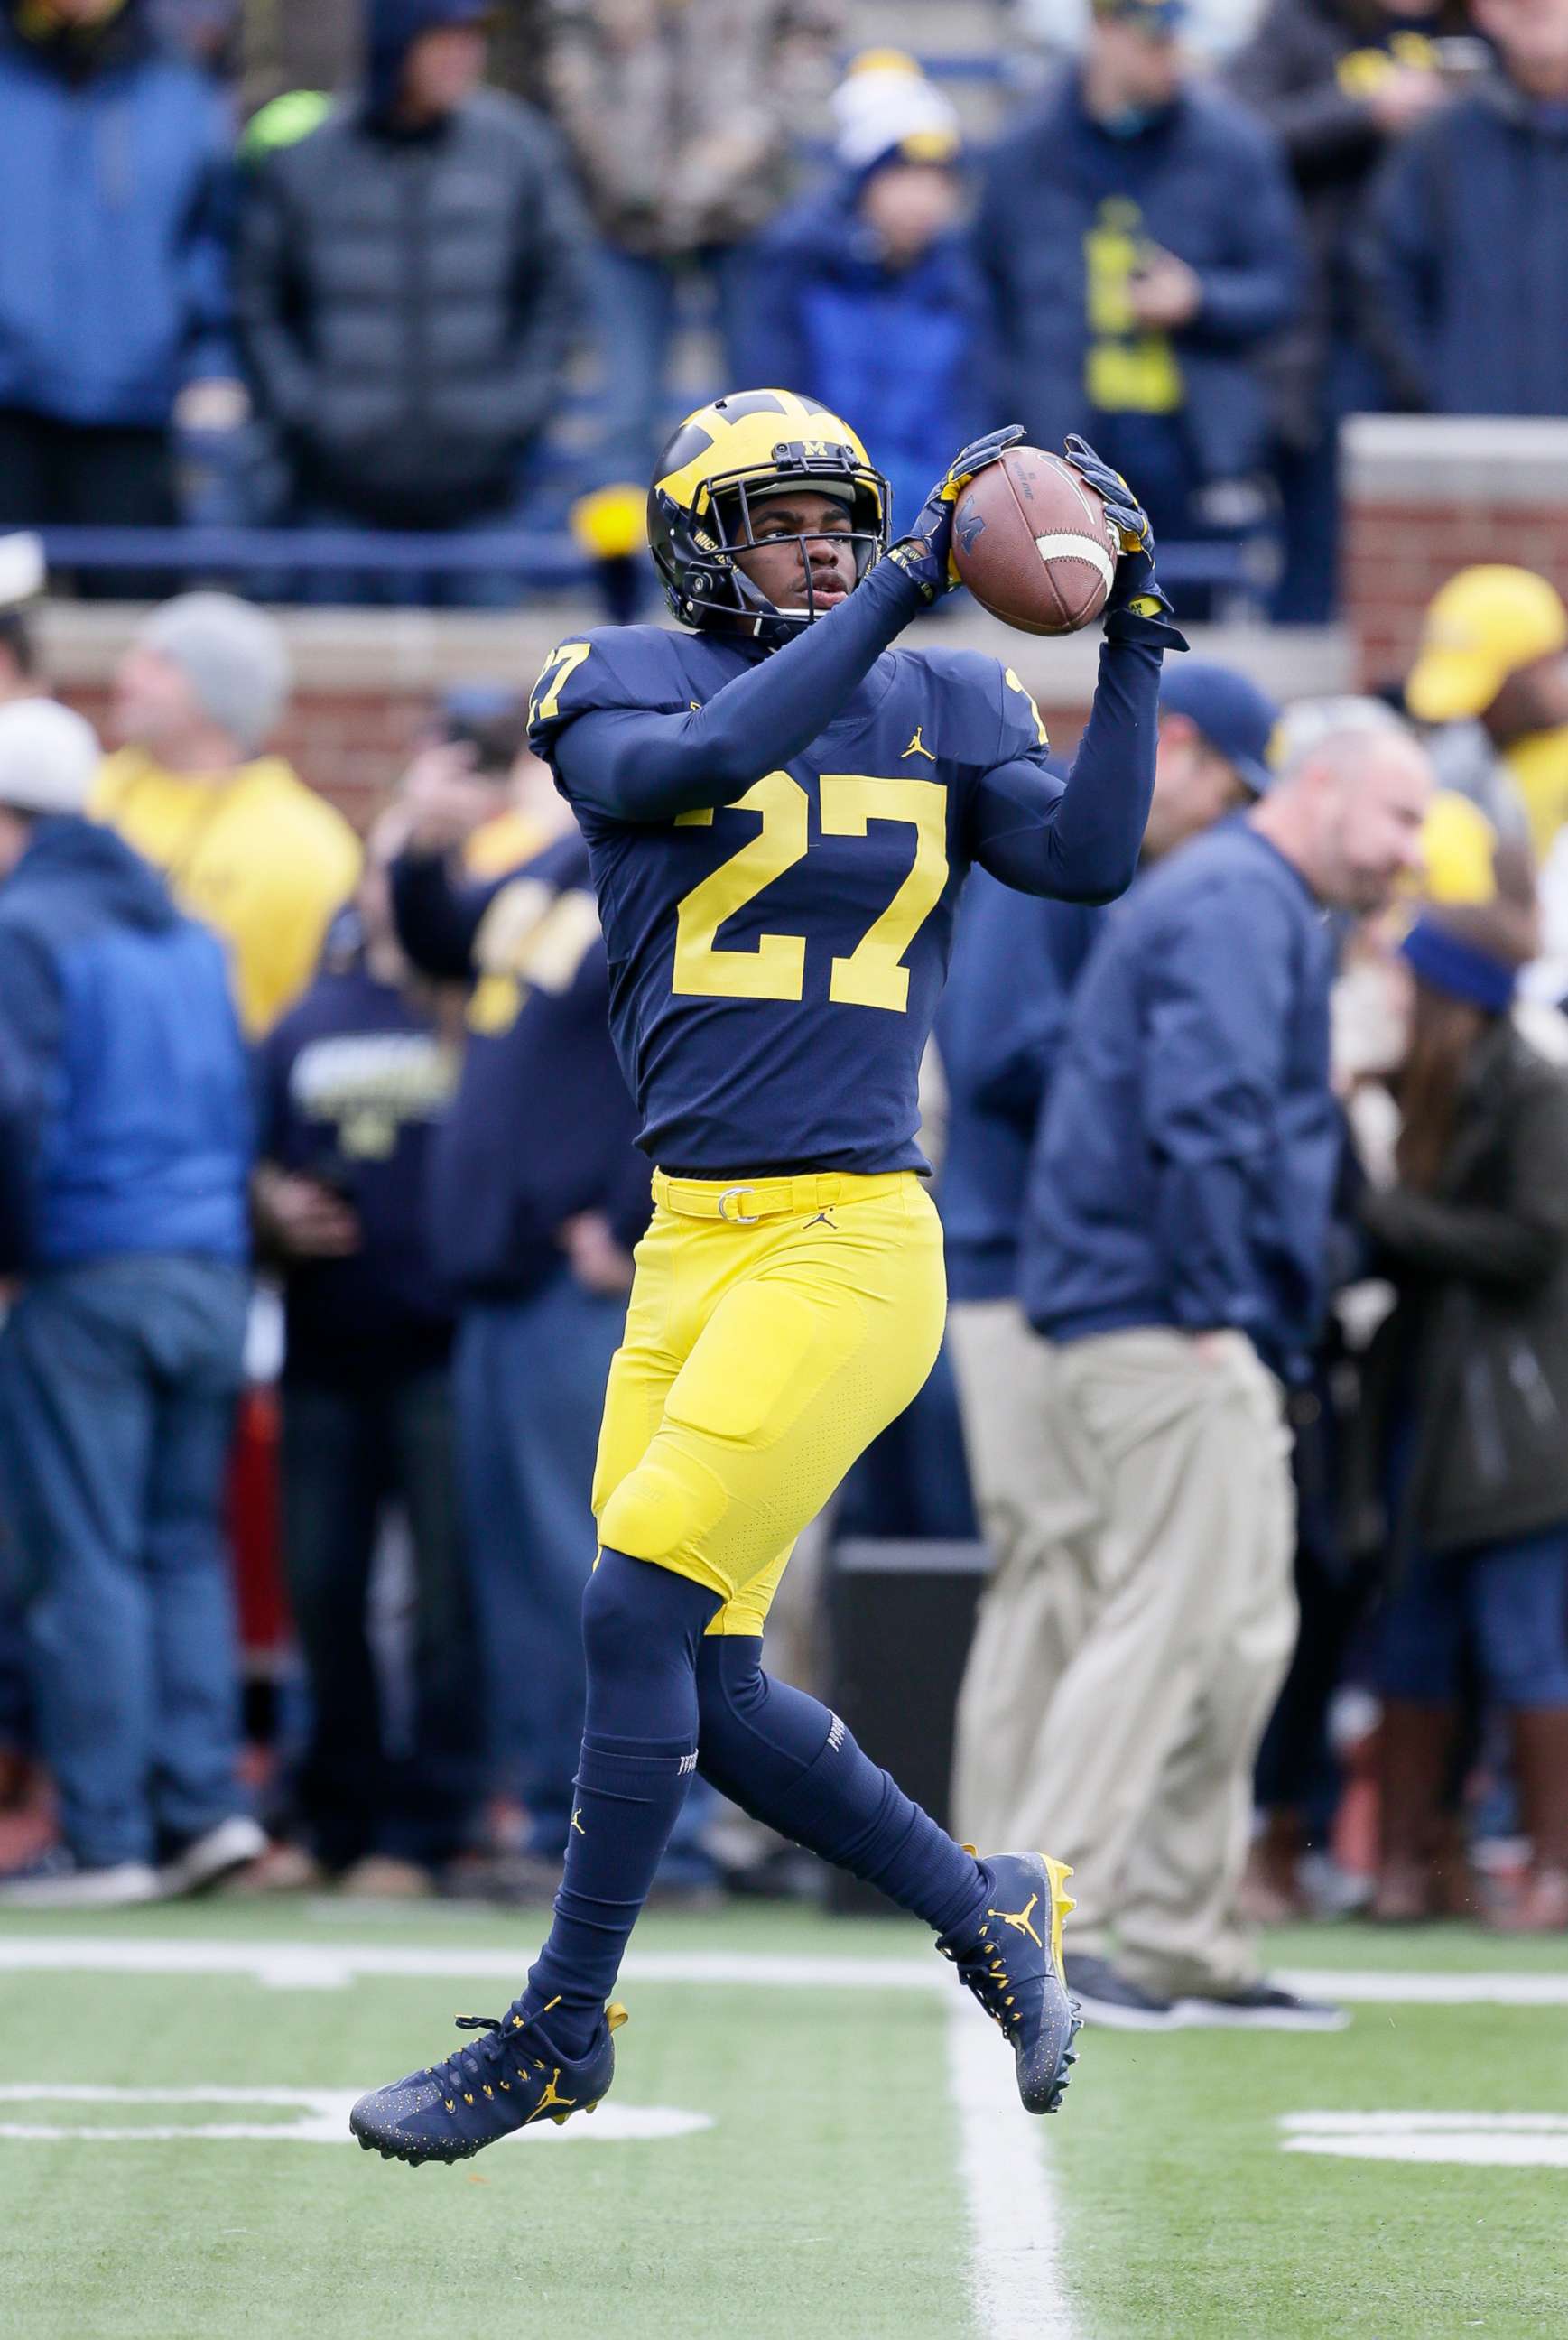 PHOTO: Defensive back Hunter Reynolds of the Michigan Wolverines makes a catch before their game against the Rutgers Scarlet Knights at Michigan Stadium, Oct. 28, 2017 in Ann Arbor, Mich.